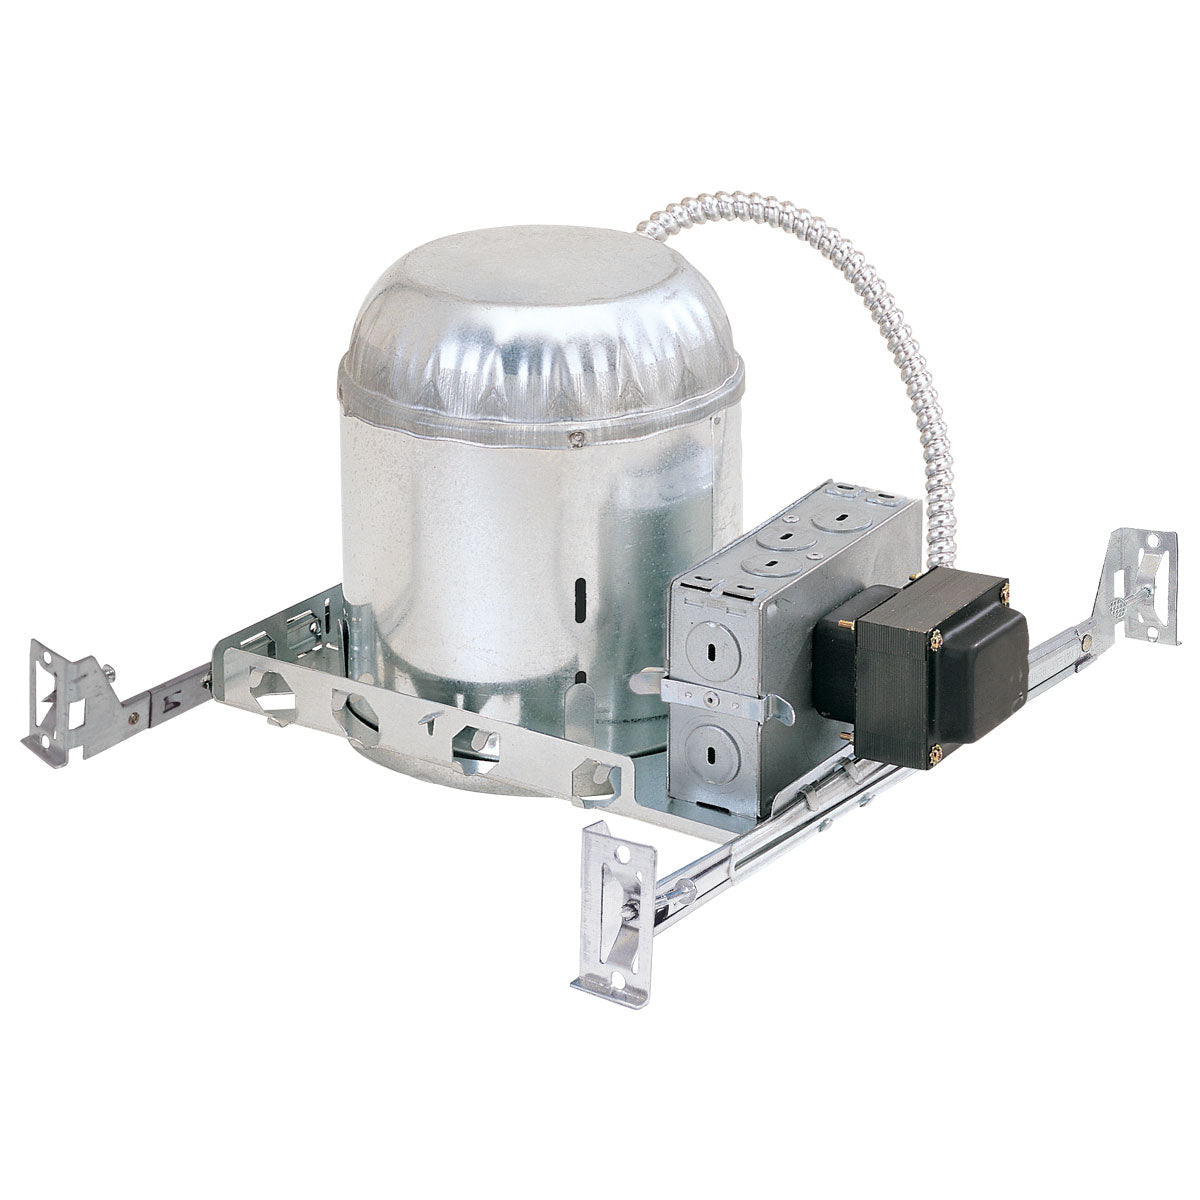 Nora Lighting NL-601/75/2EL - Recessed - 6 Inch Low Voltage Housing, 277V/12V Elect. Transformer, Rated for 75W